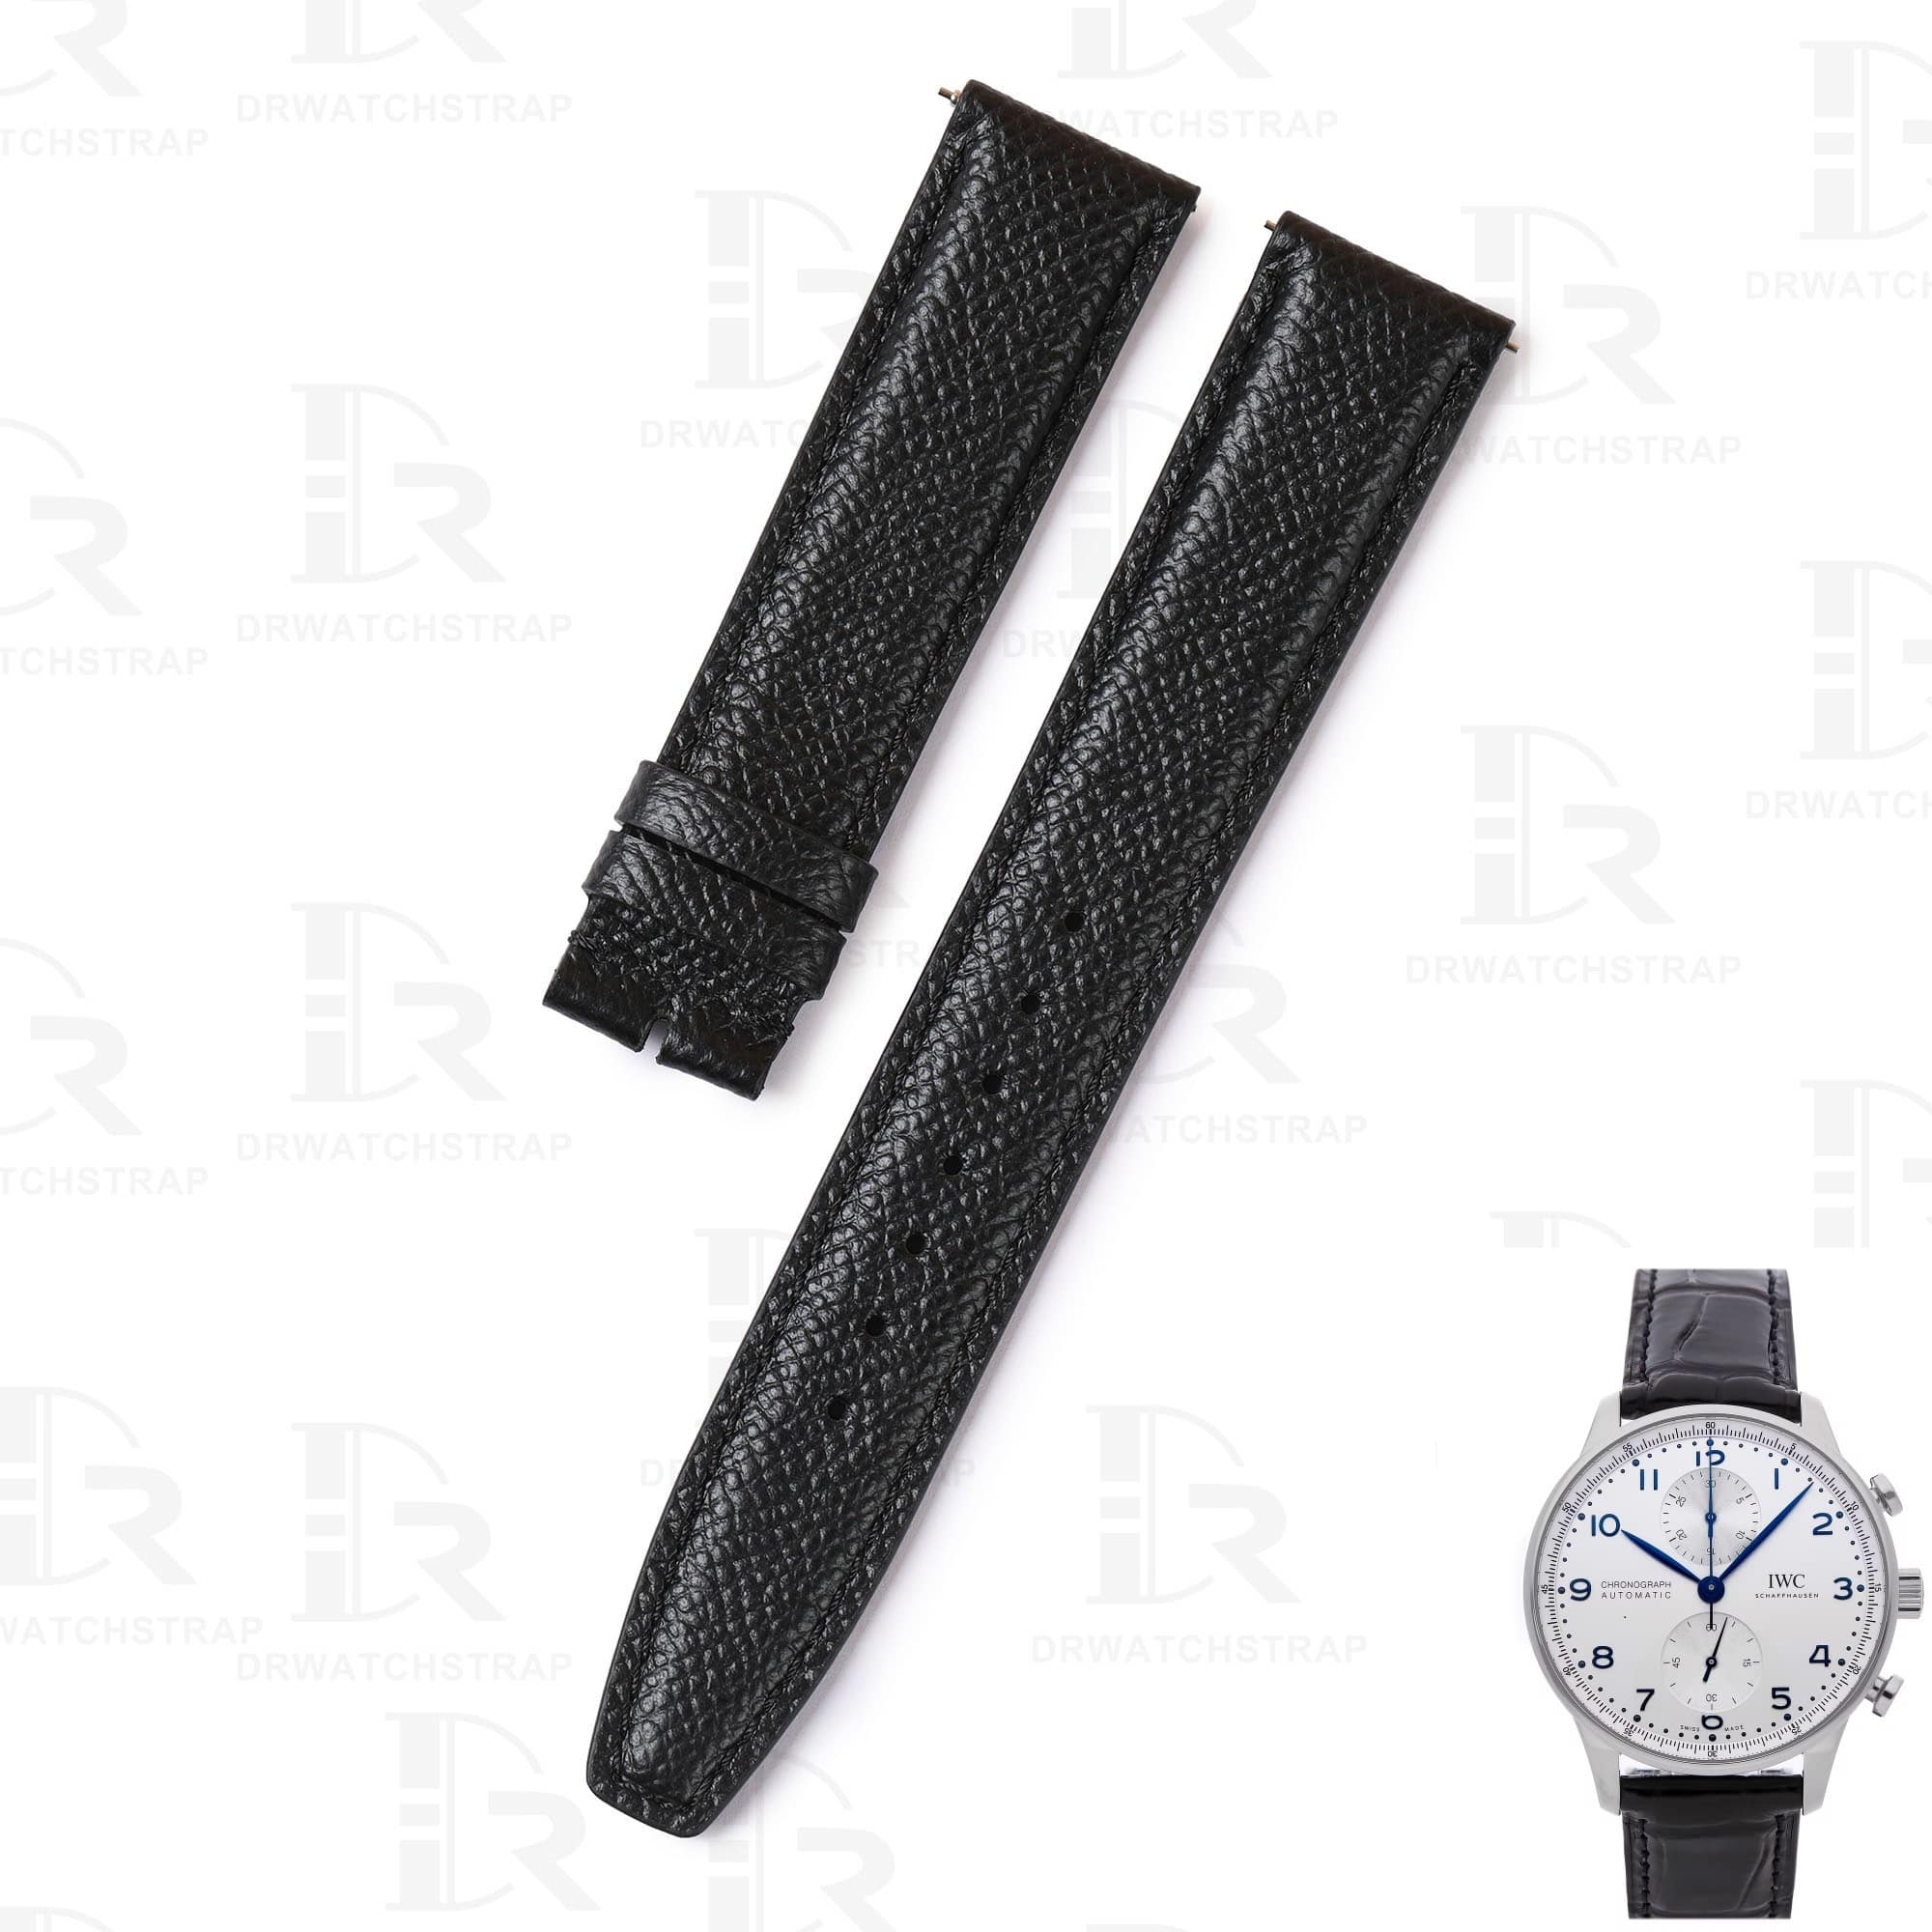 Custom best quality handmade black Epsom leather watch band and strap replacement for IWC Big Pilot Top Gun 20mm 21mm 22mm luxury watches online - Shop the premium aftermarket OEM leather straps and watch bands for sale at a low price